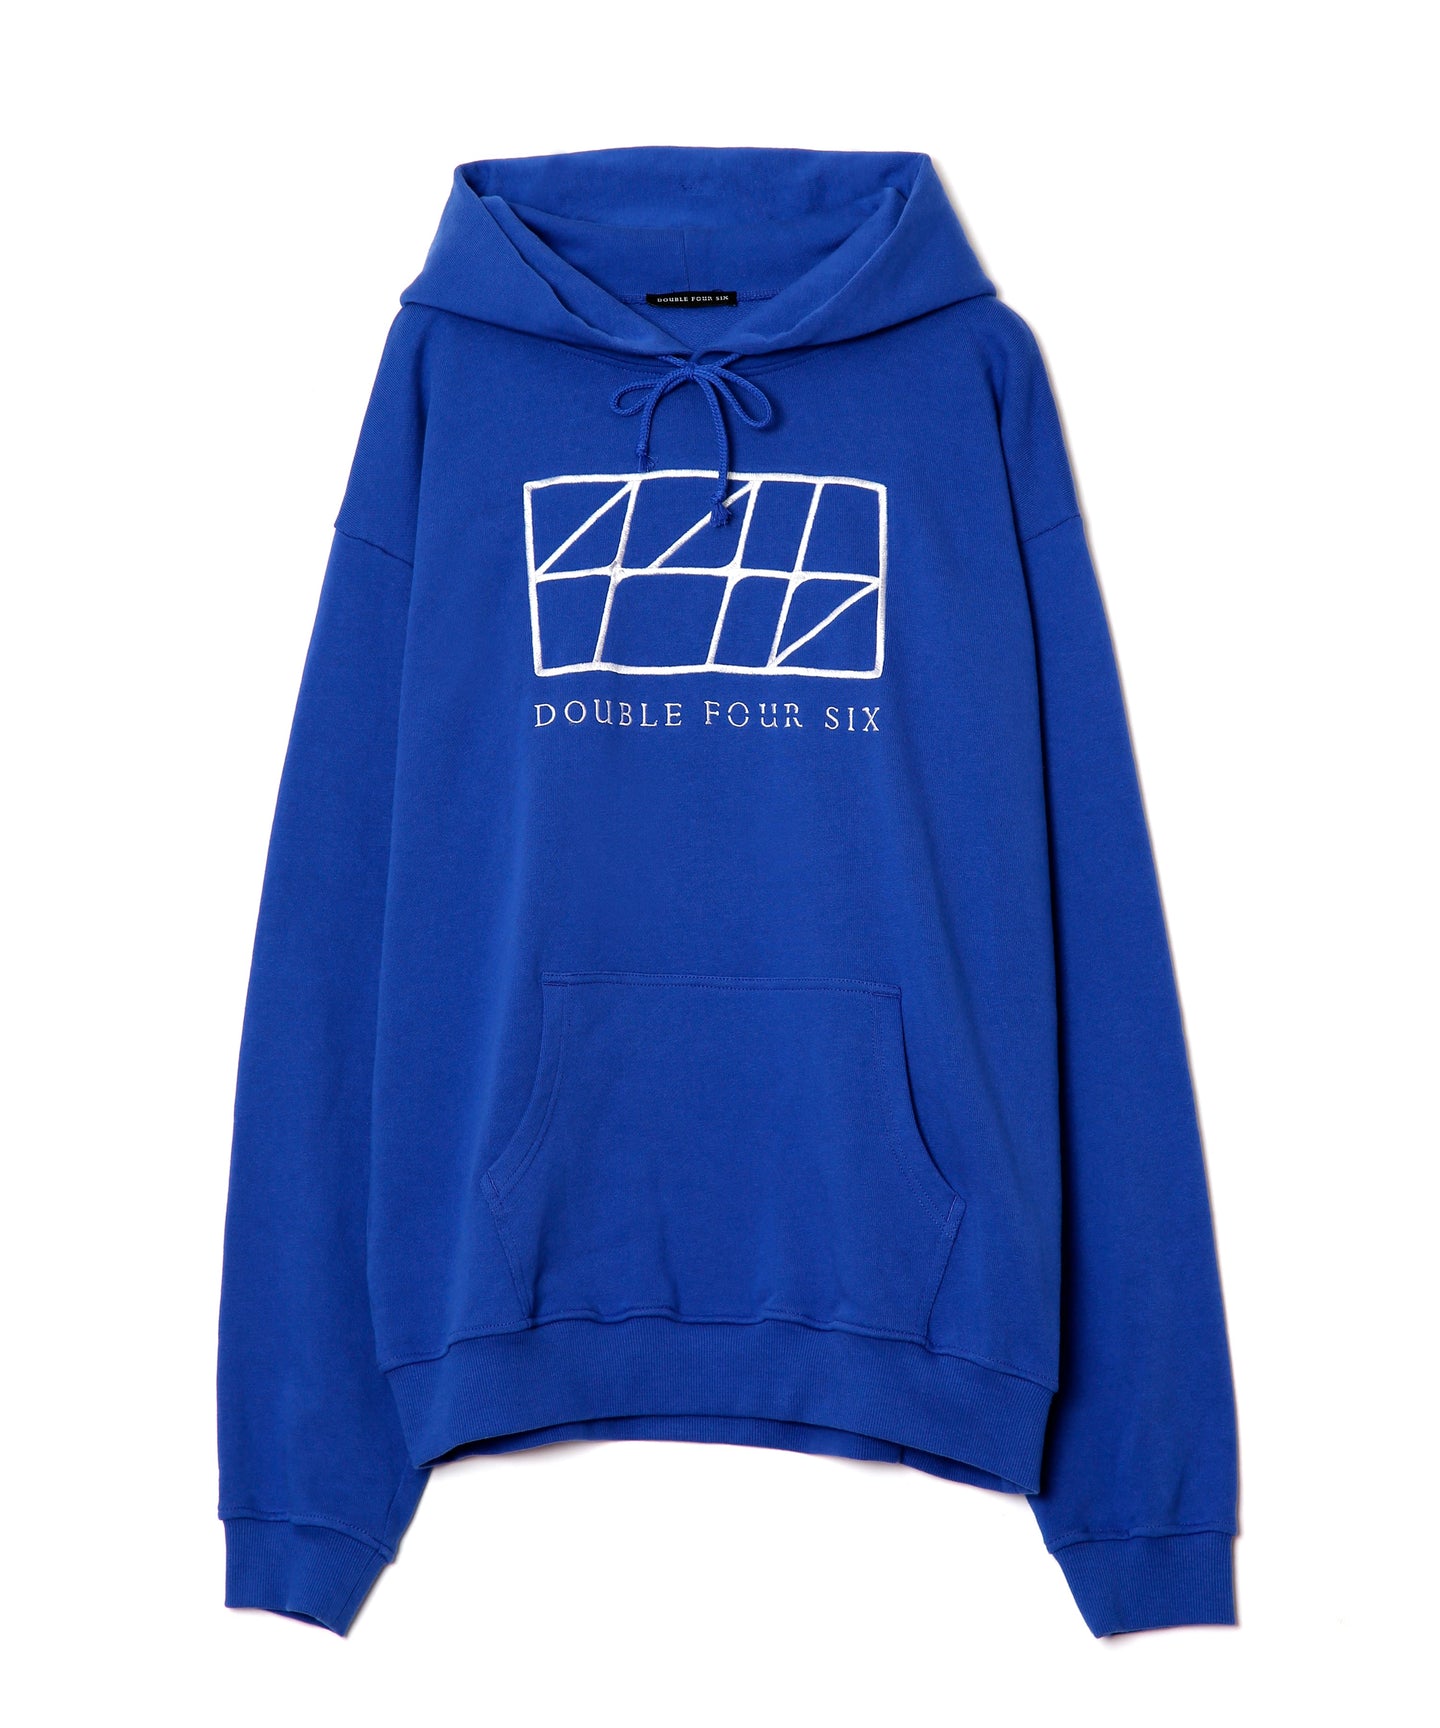 Hoodie 2021limited edition blue